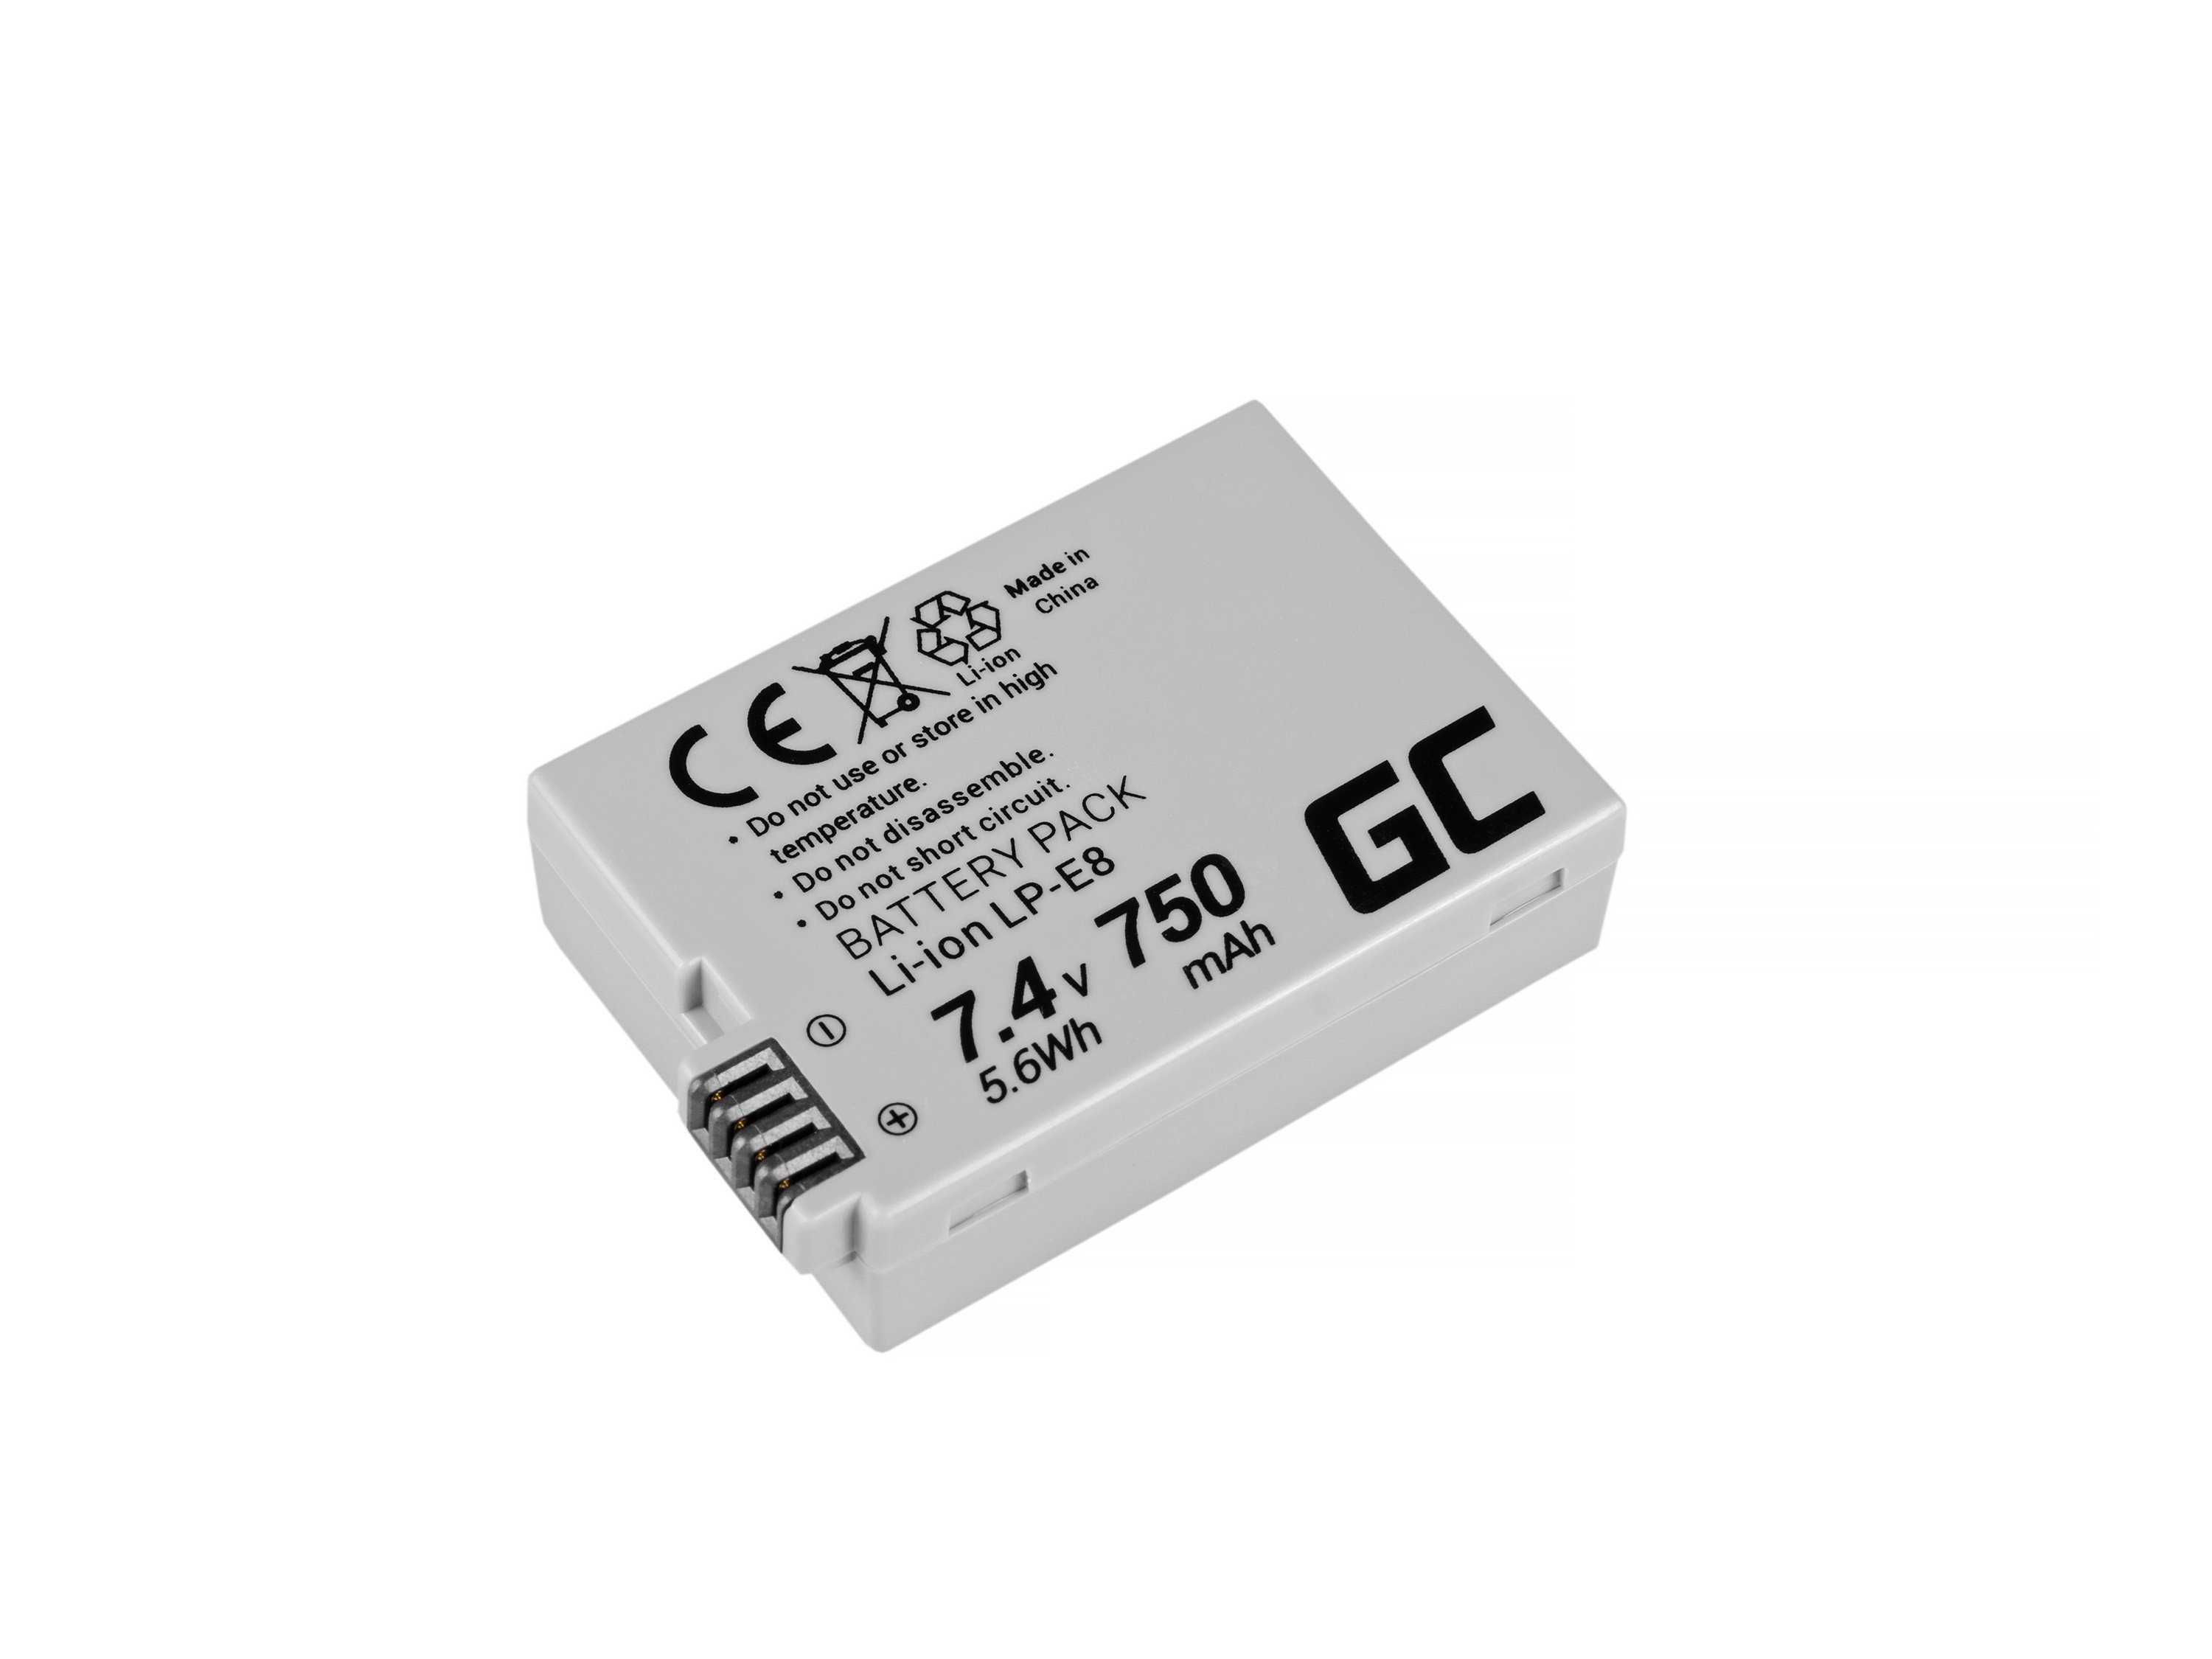 Battery Green Cell LP-E8 ® for Canon EOS Rebel T2i, T3i, T4i, T5i, EOS 600D, 550 Baterija